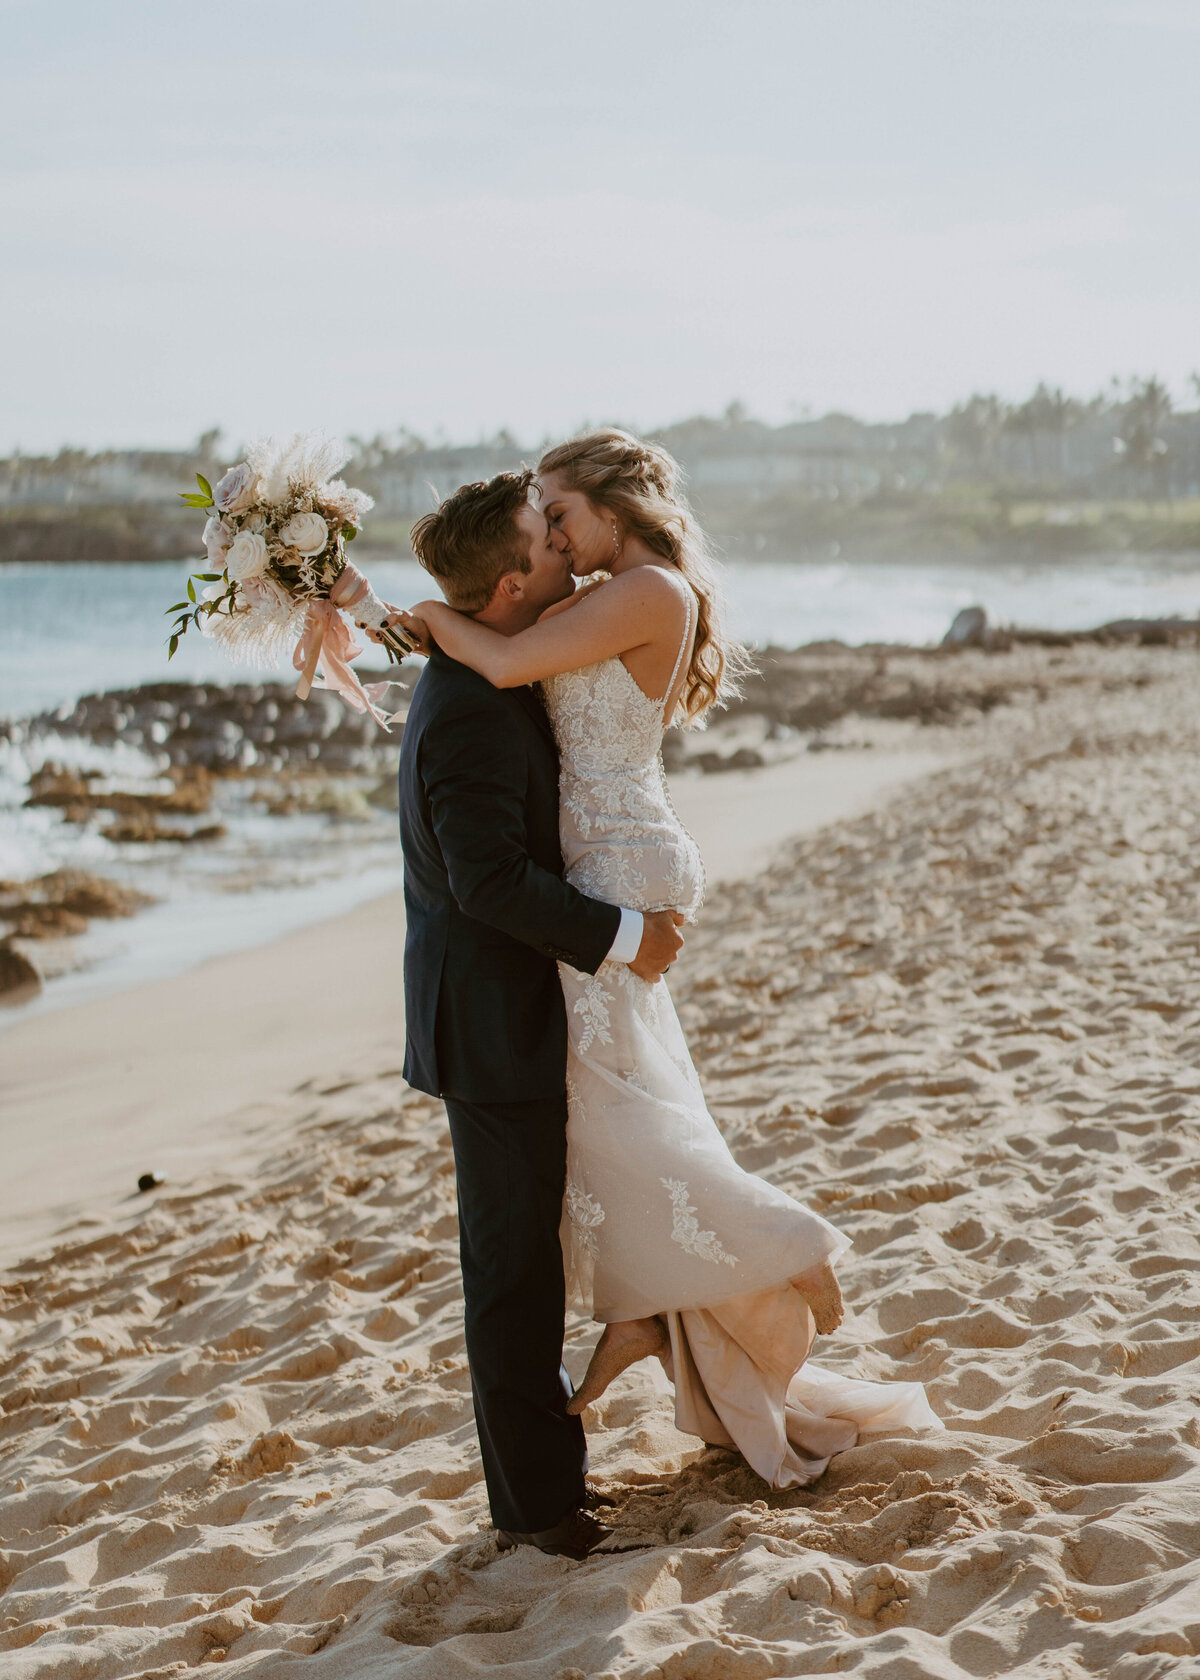 Nicole and Ethan got married at one of the many beautiful beaches in Hawaii.